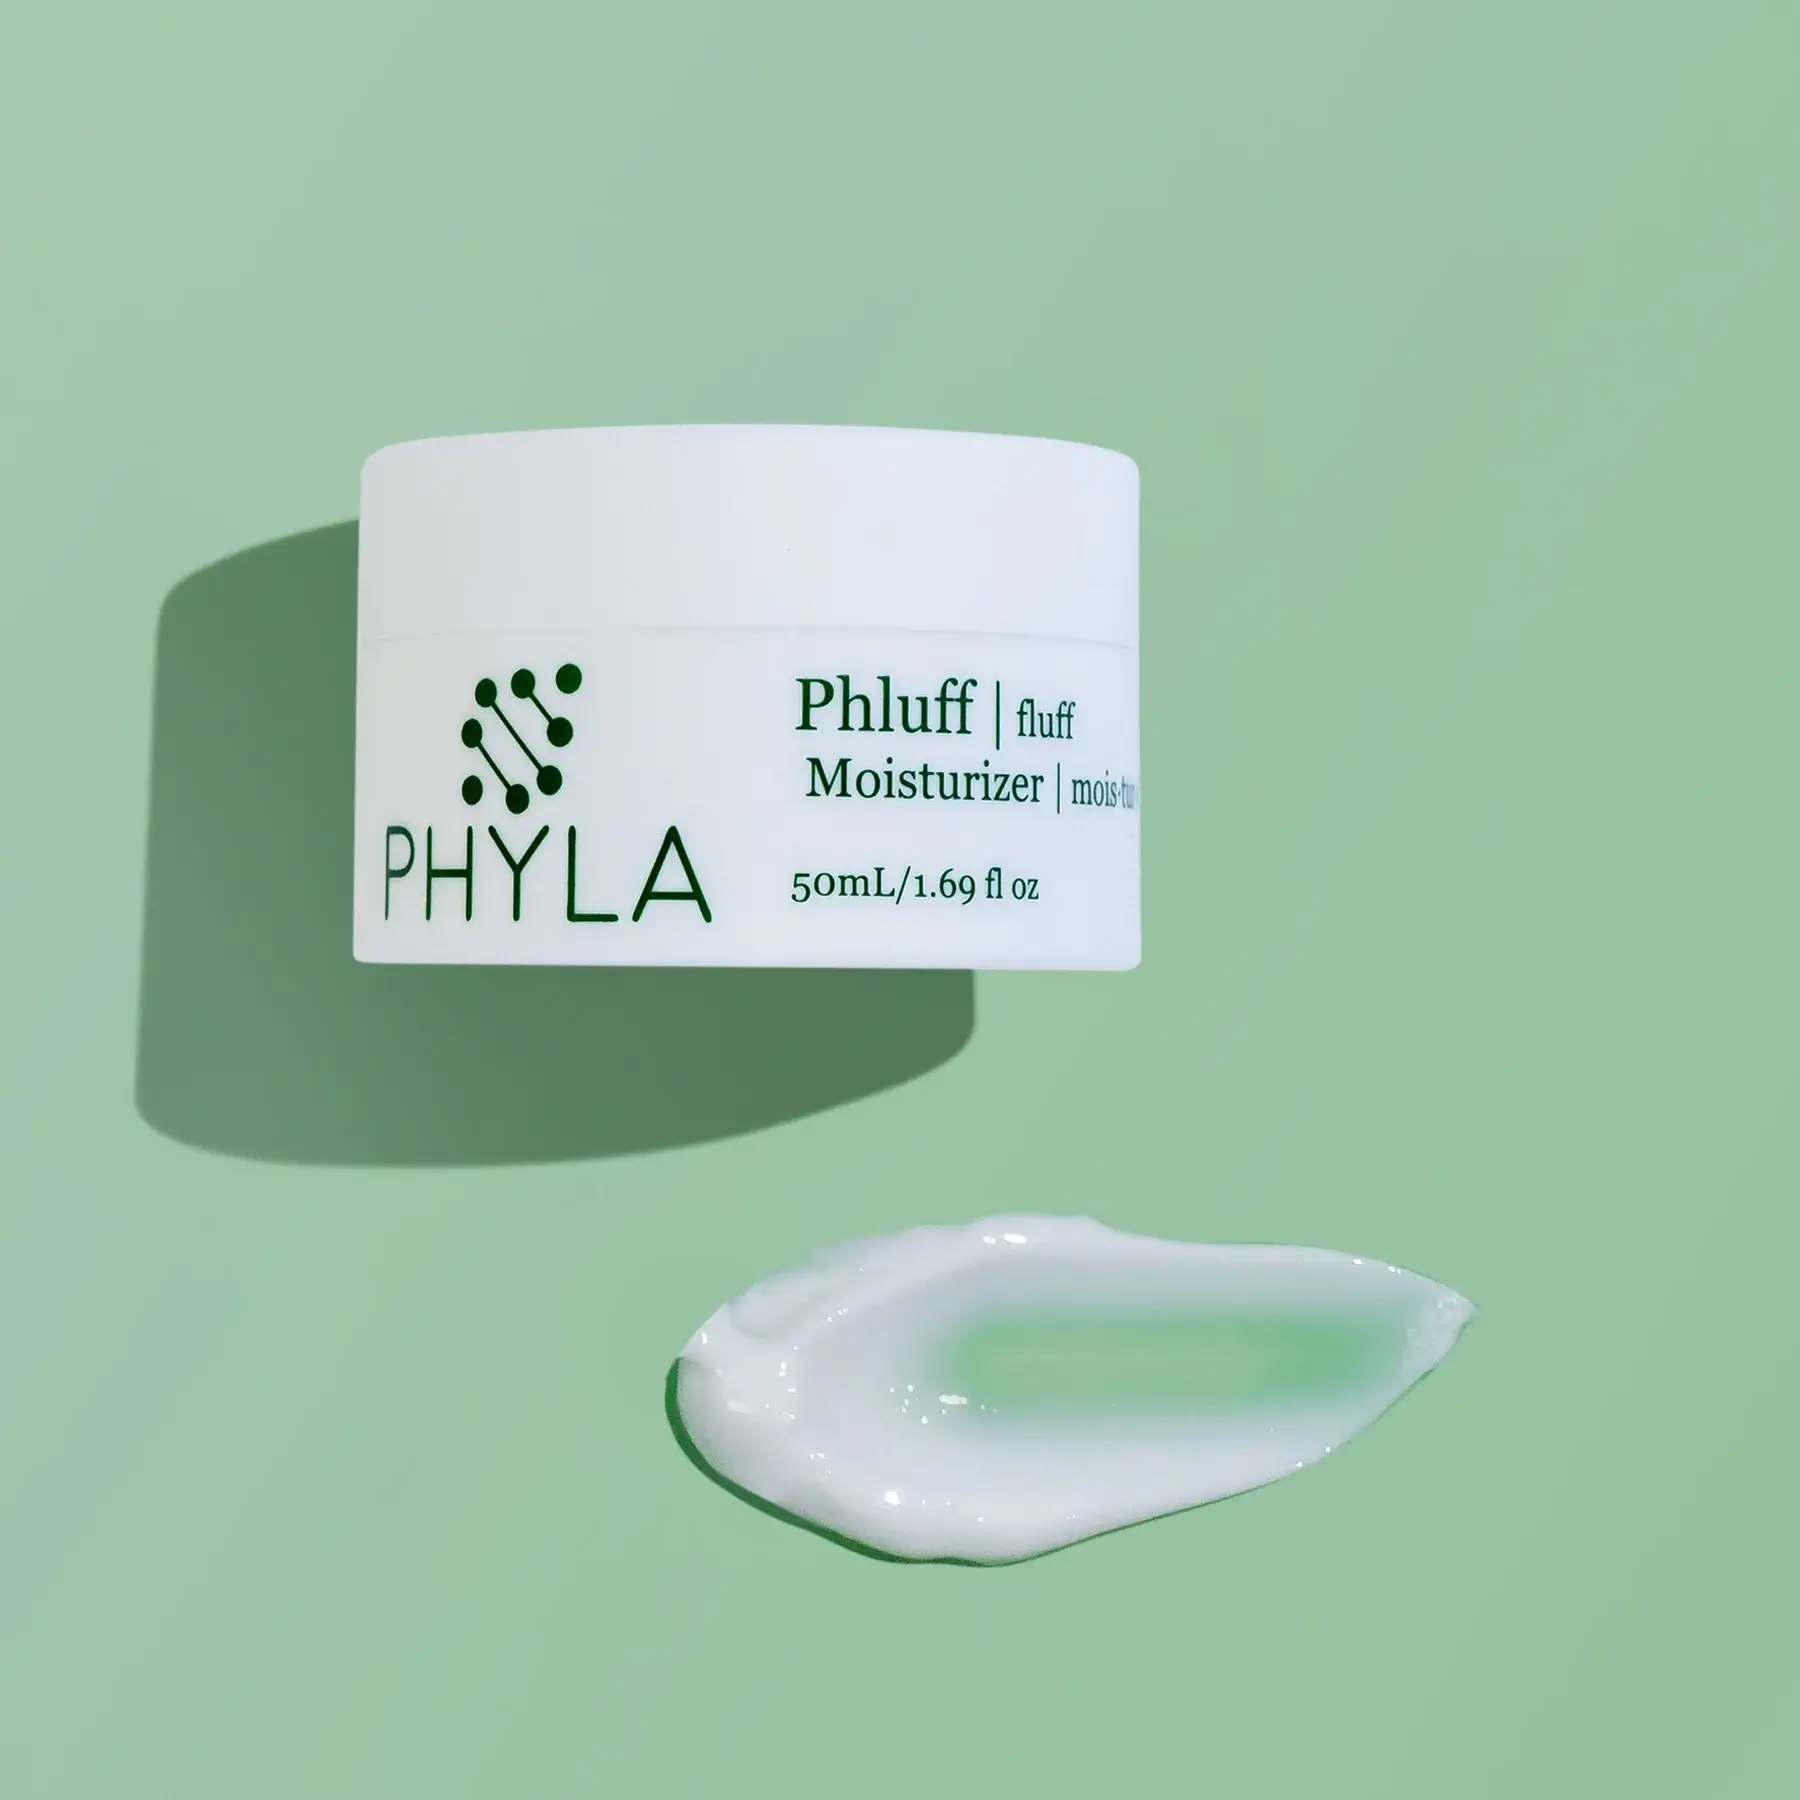 Is phyla a good moisturizer- it's great to get rid of acne and help hydrate the skin and is considered the top moisturizer for acne